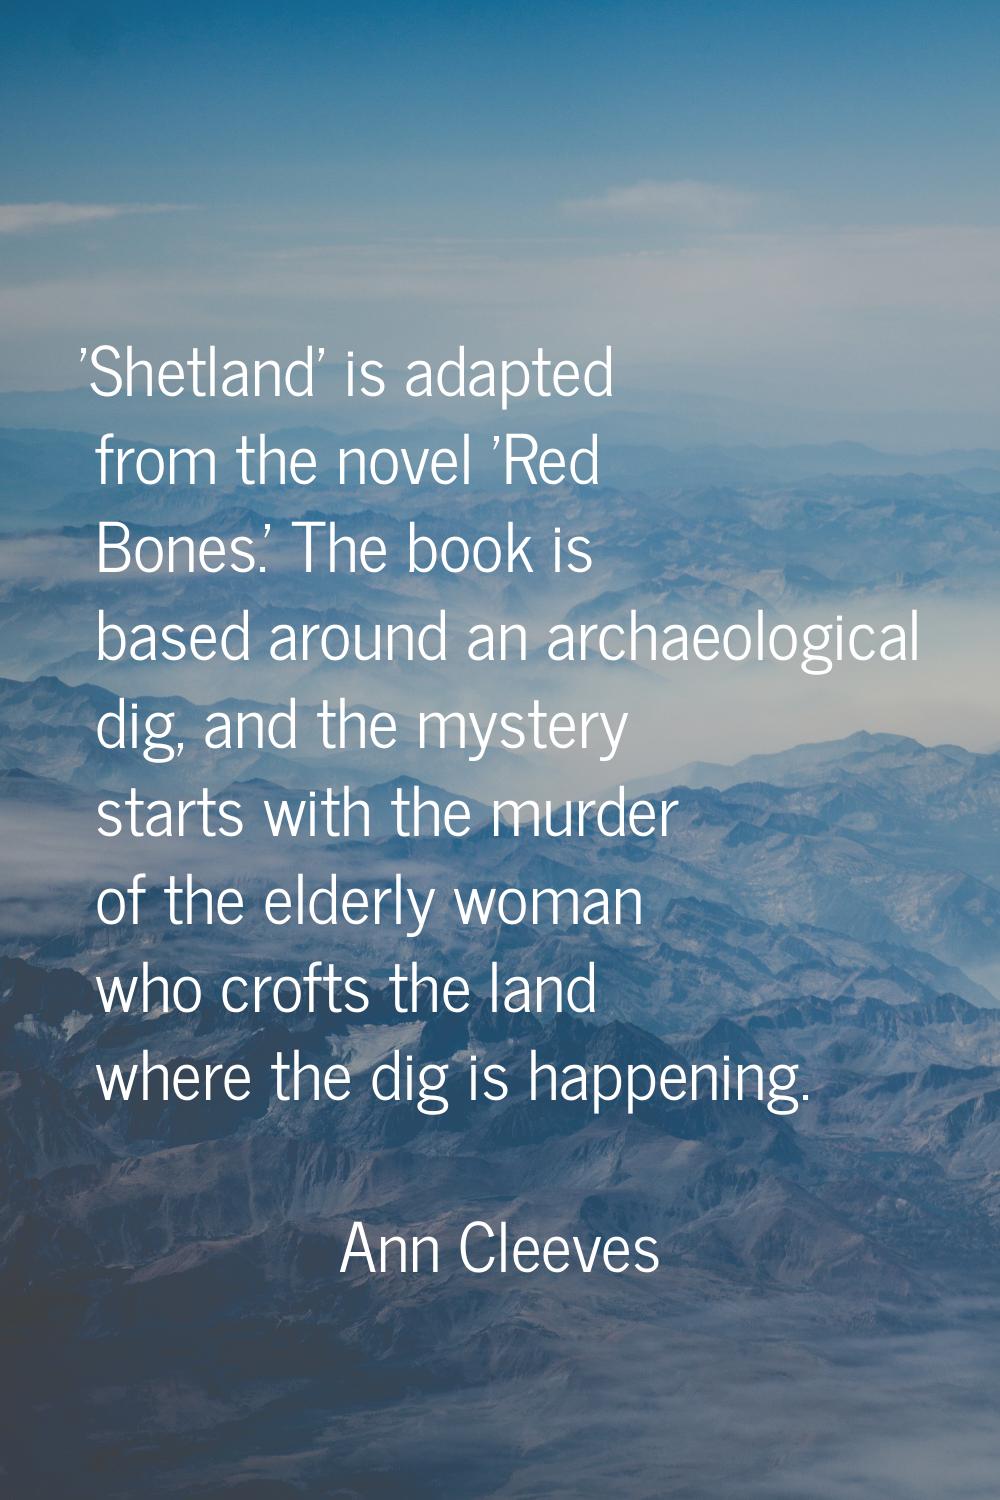 'Shetland' is adapted from the novel 'Red Bones.' The book is based around an archaeological dig, a